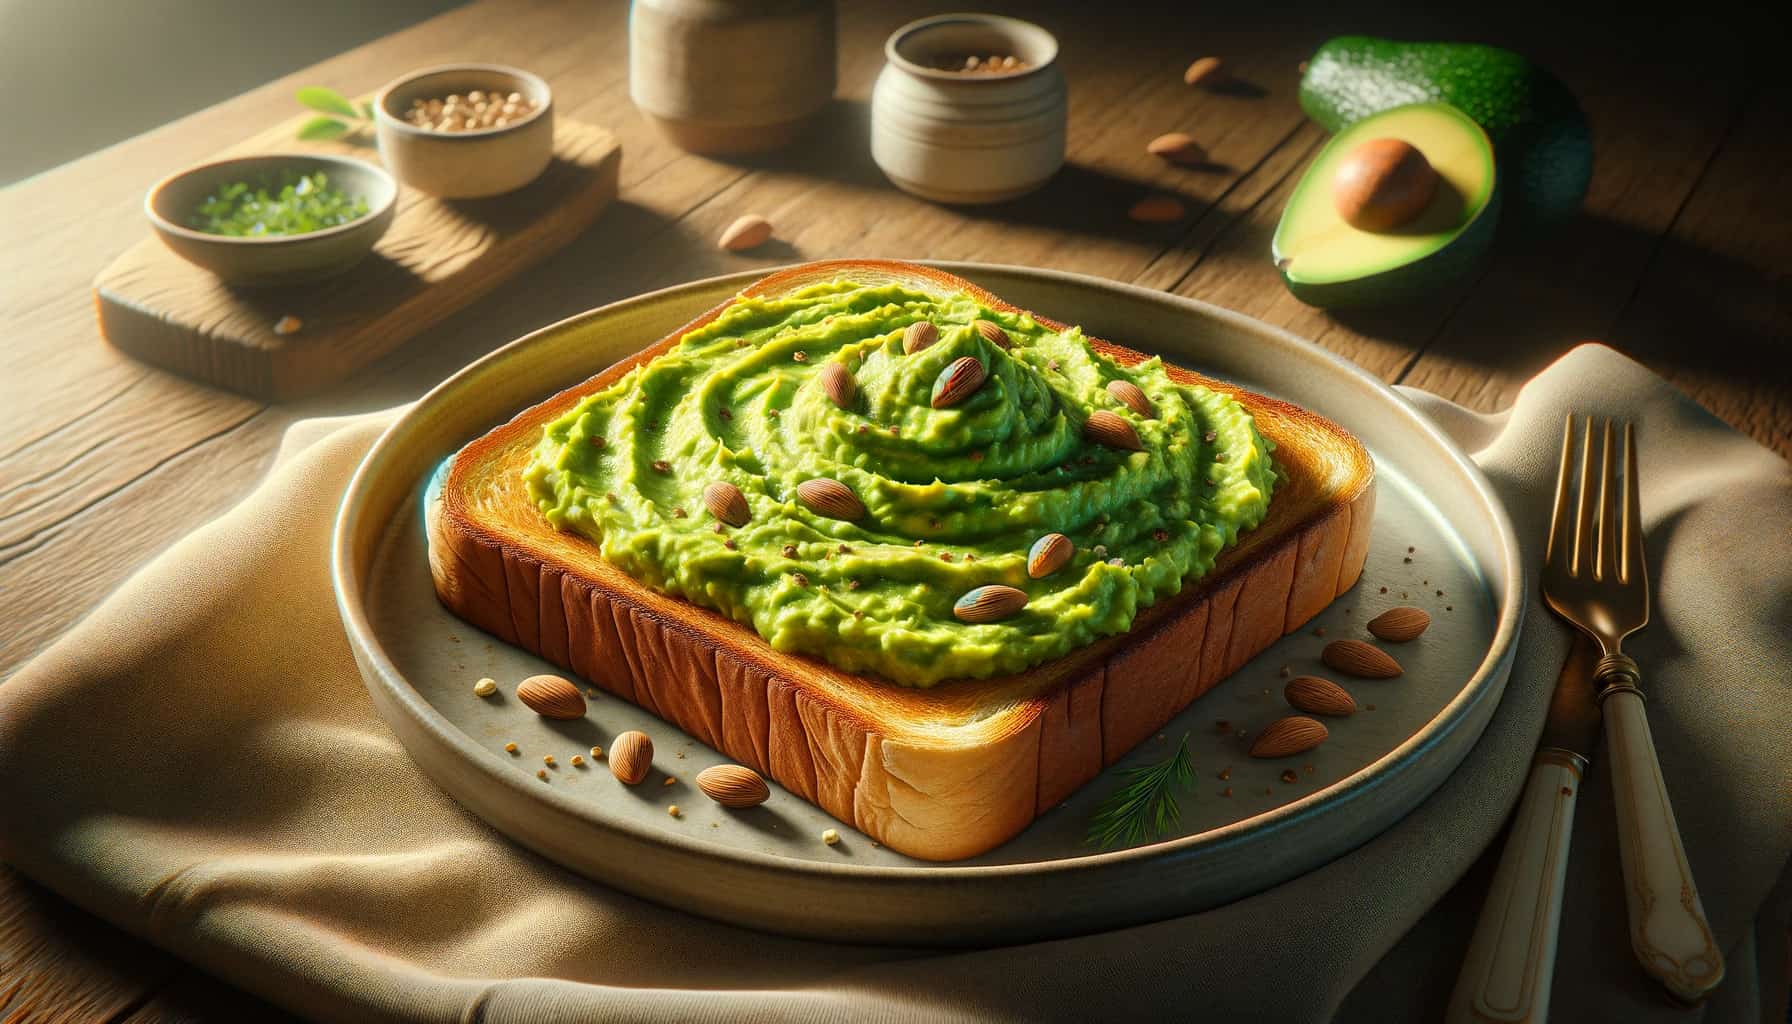 Mashed avocado spread on golden brown toast